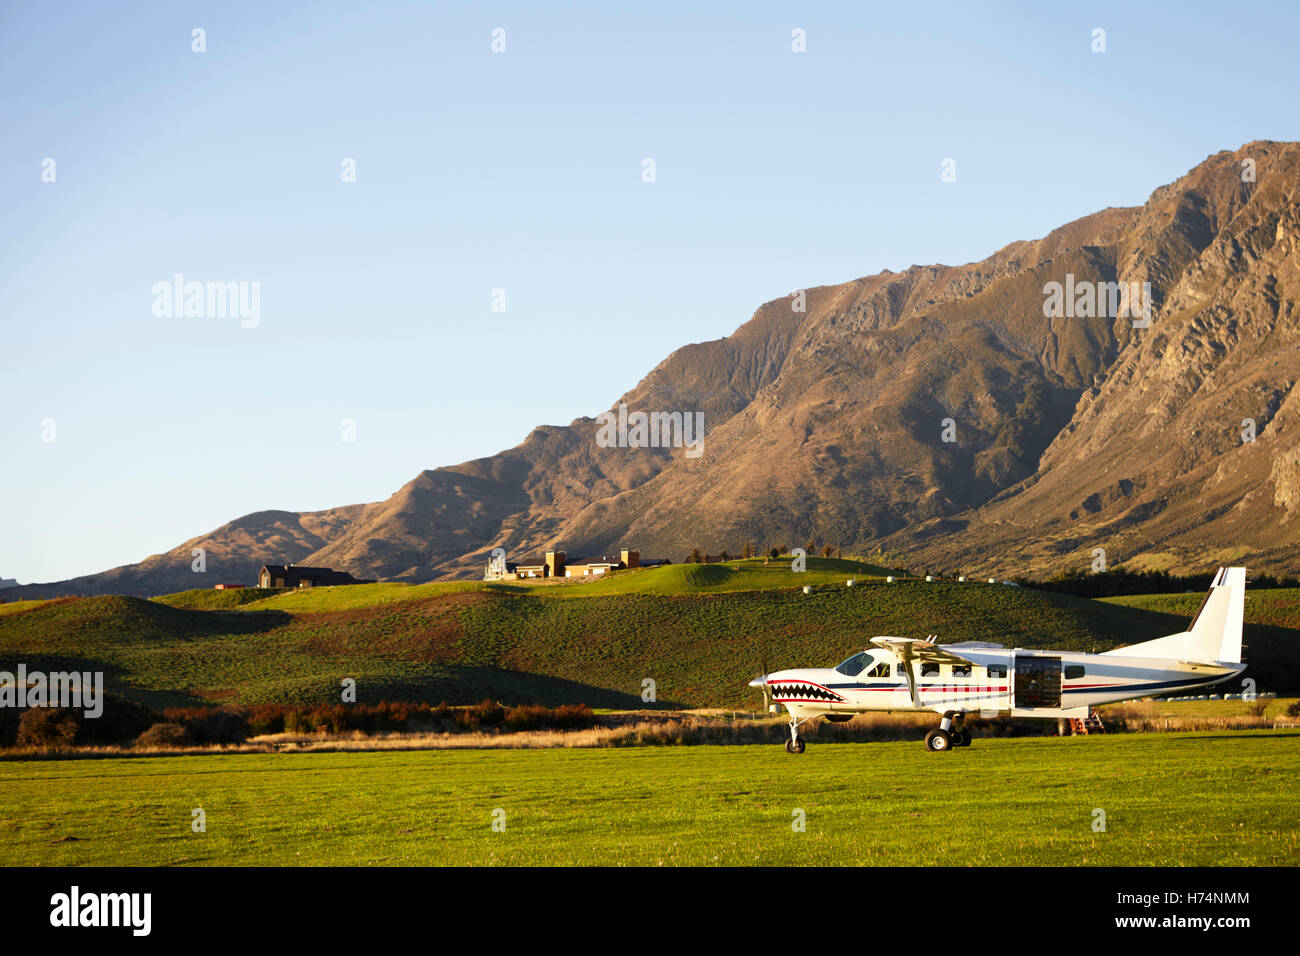 Light Aircraft Used For Skydiving In New Zealand Field Stock Photo